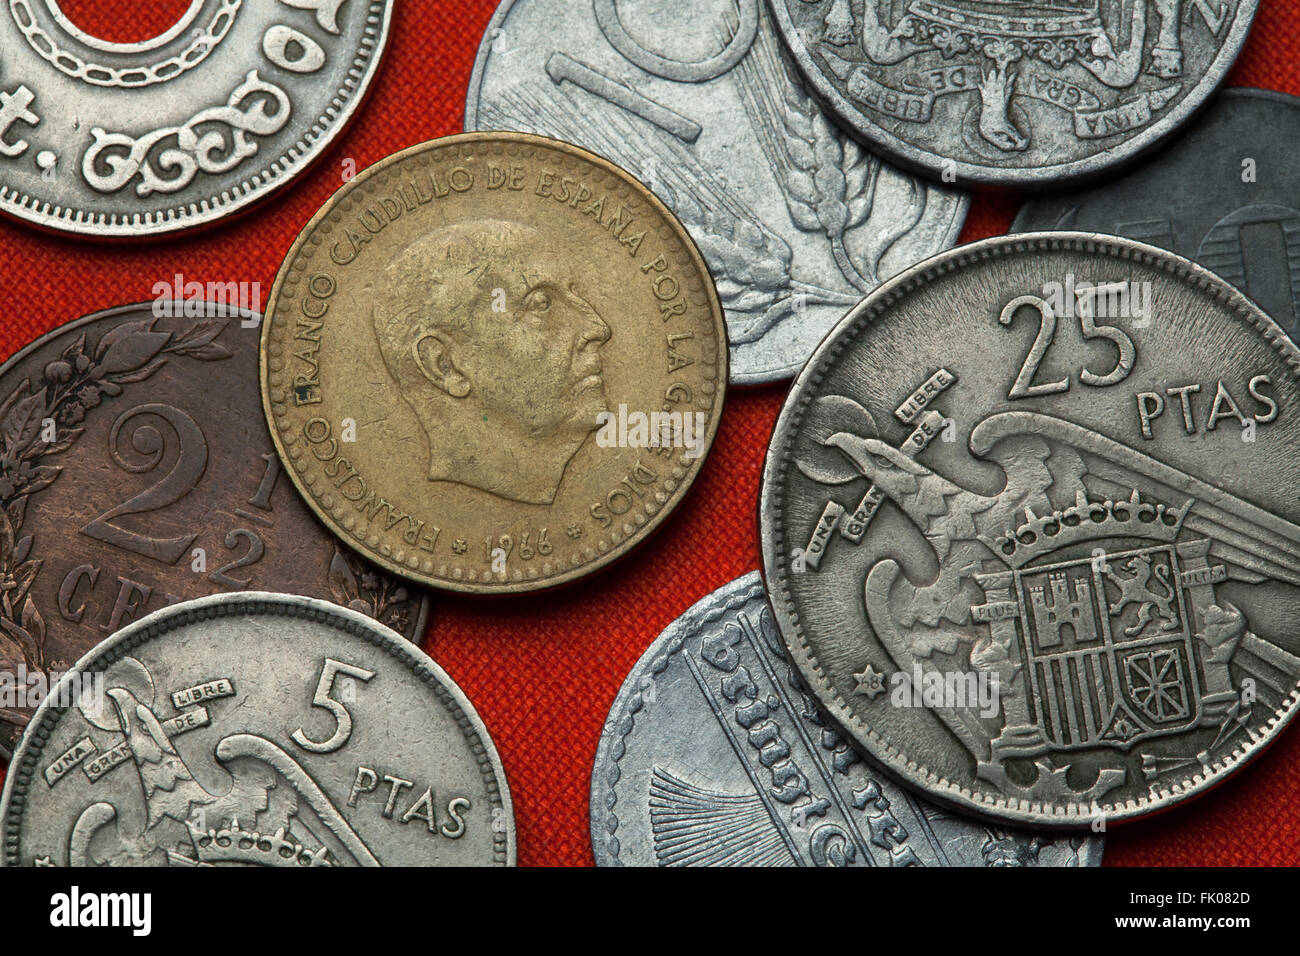 Coins of Spain under Franco. Spanish dictator Francisco Franco depicted in the Spanish one peseta coin (1966). Stock Photo